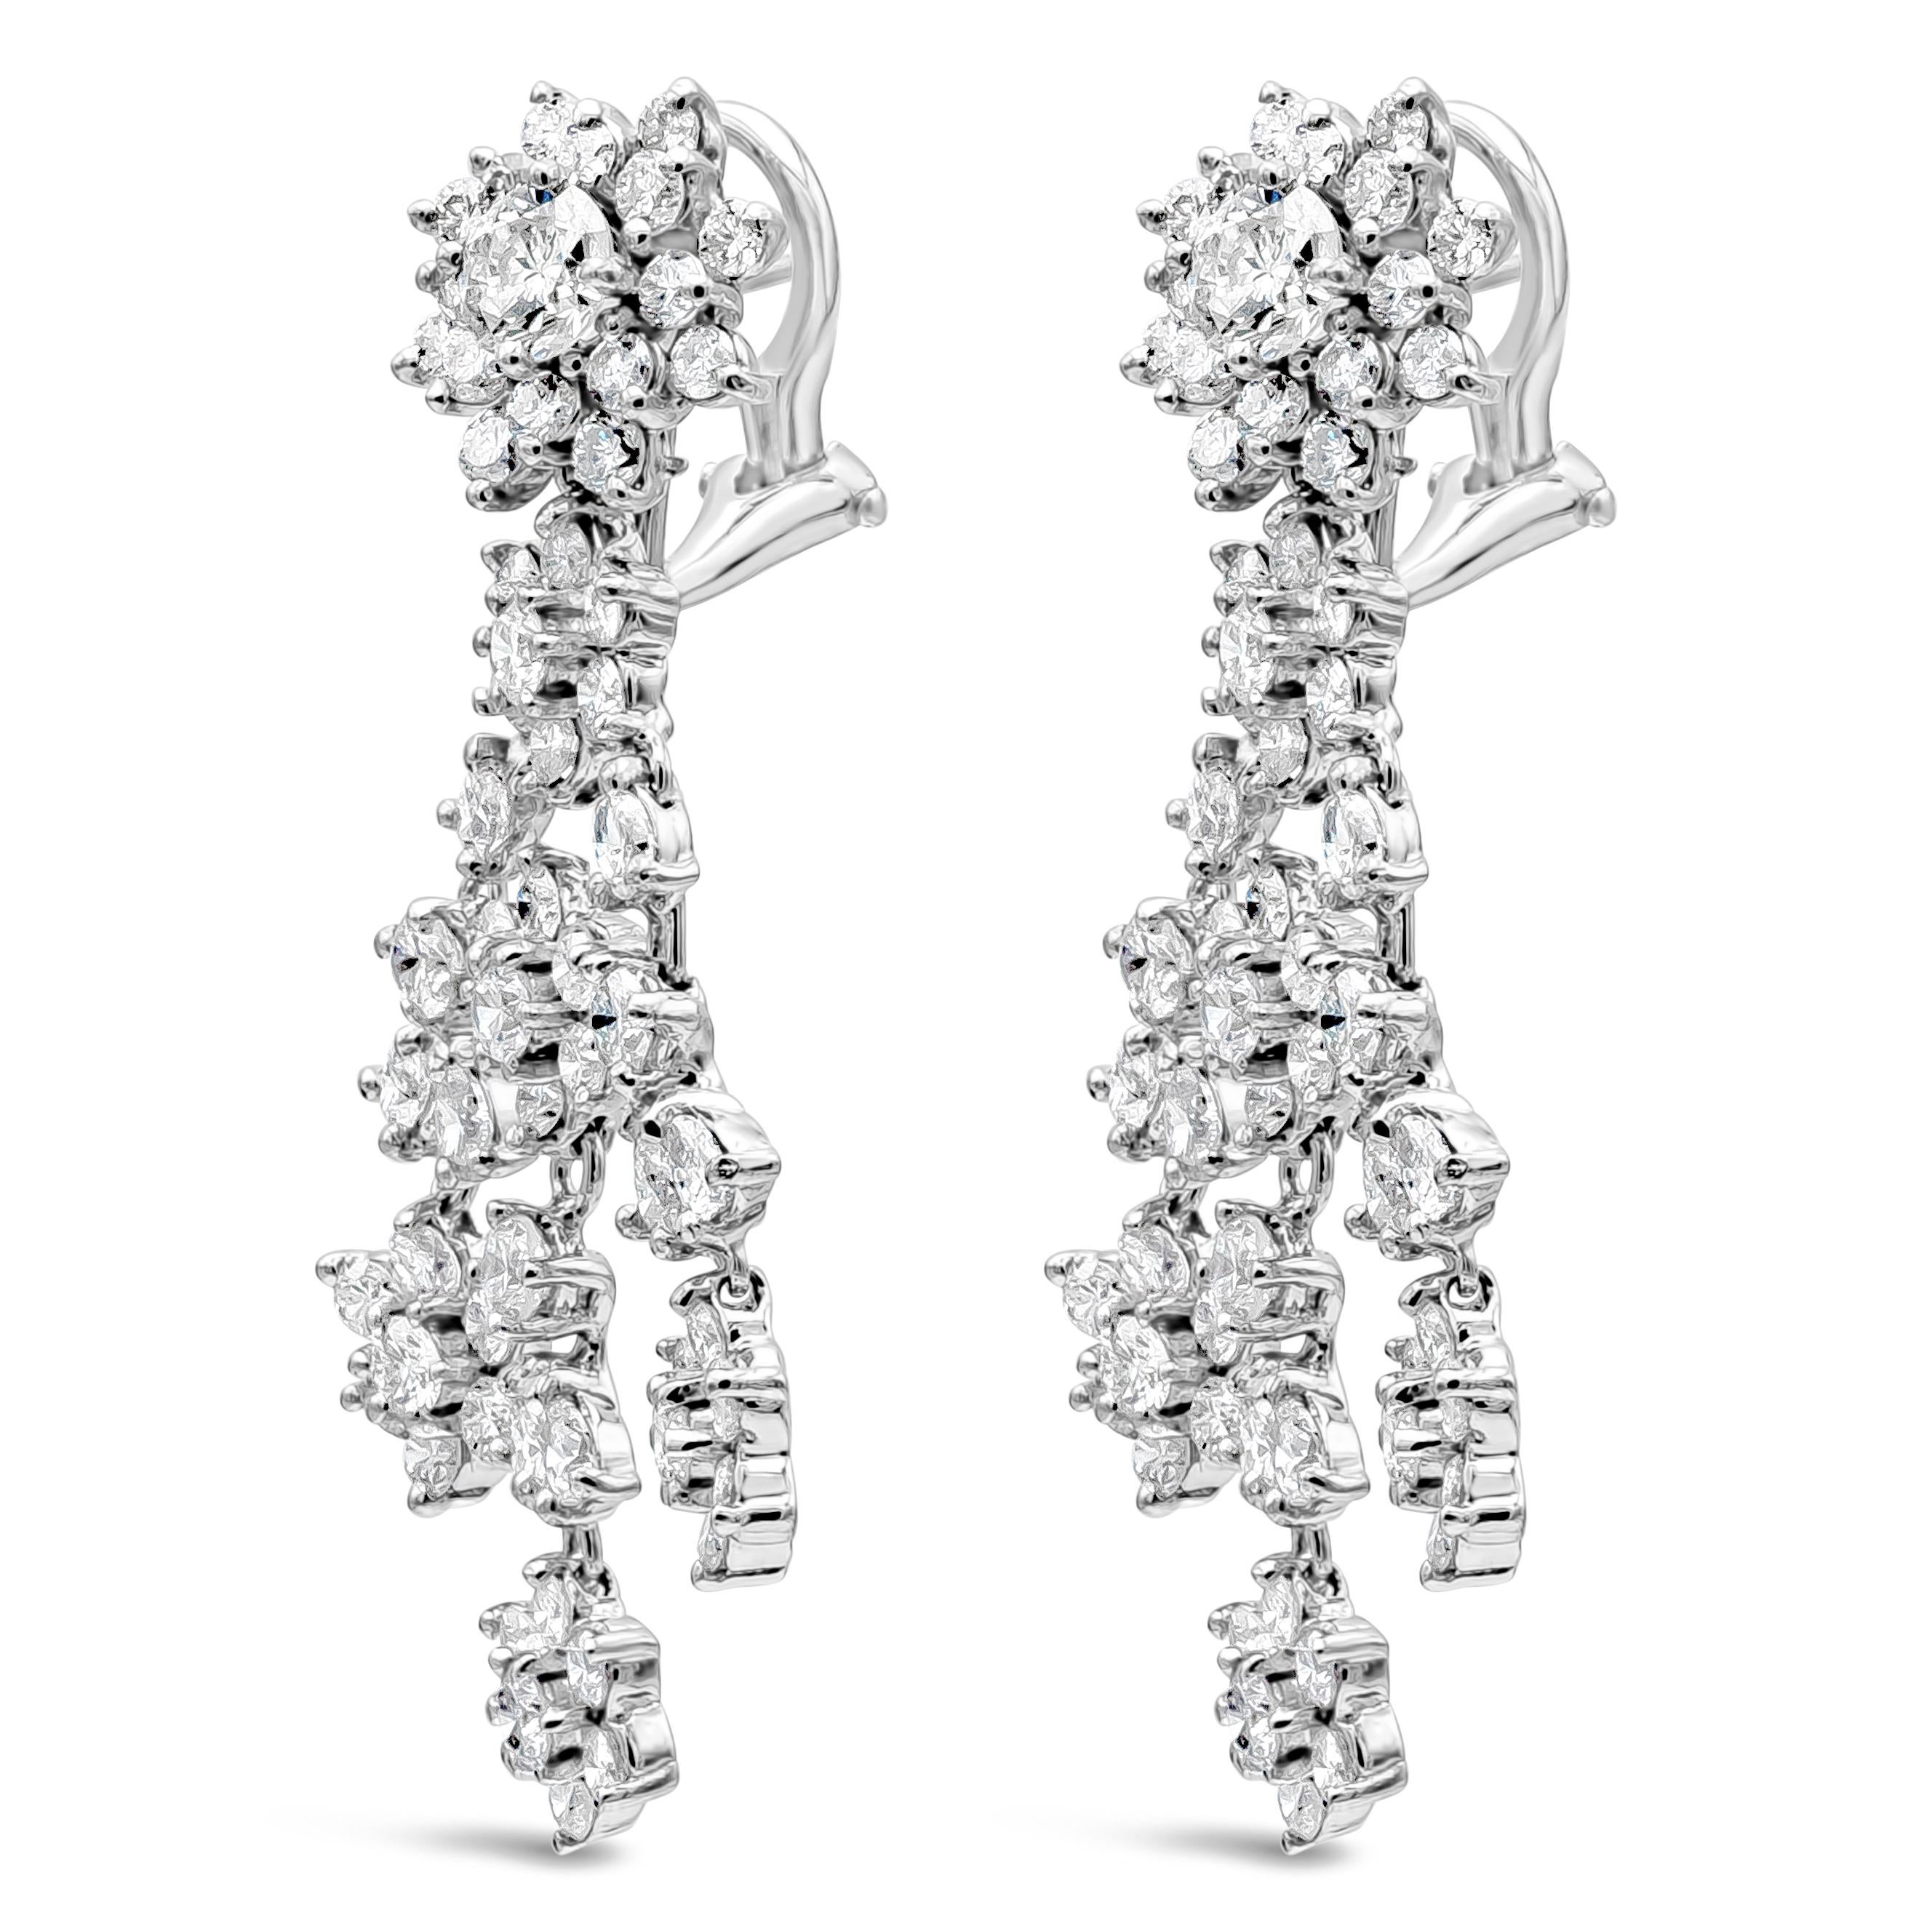 A brilliant pair of dangle earrings showcasing round shape diamonds in a floral-motif design, evenly spaced by round and pear shape diamonds set in an elegant chandelier design. Diamonds weigh 7.98 carats total. Made with 18K White Gold

Style